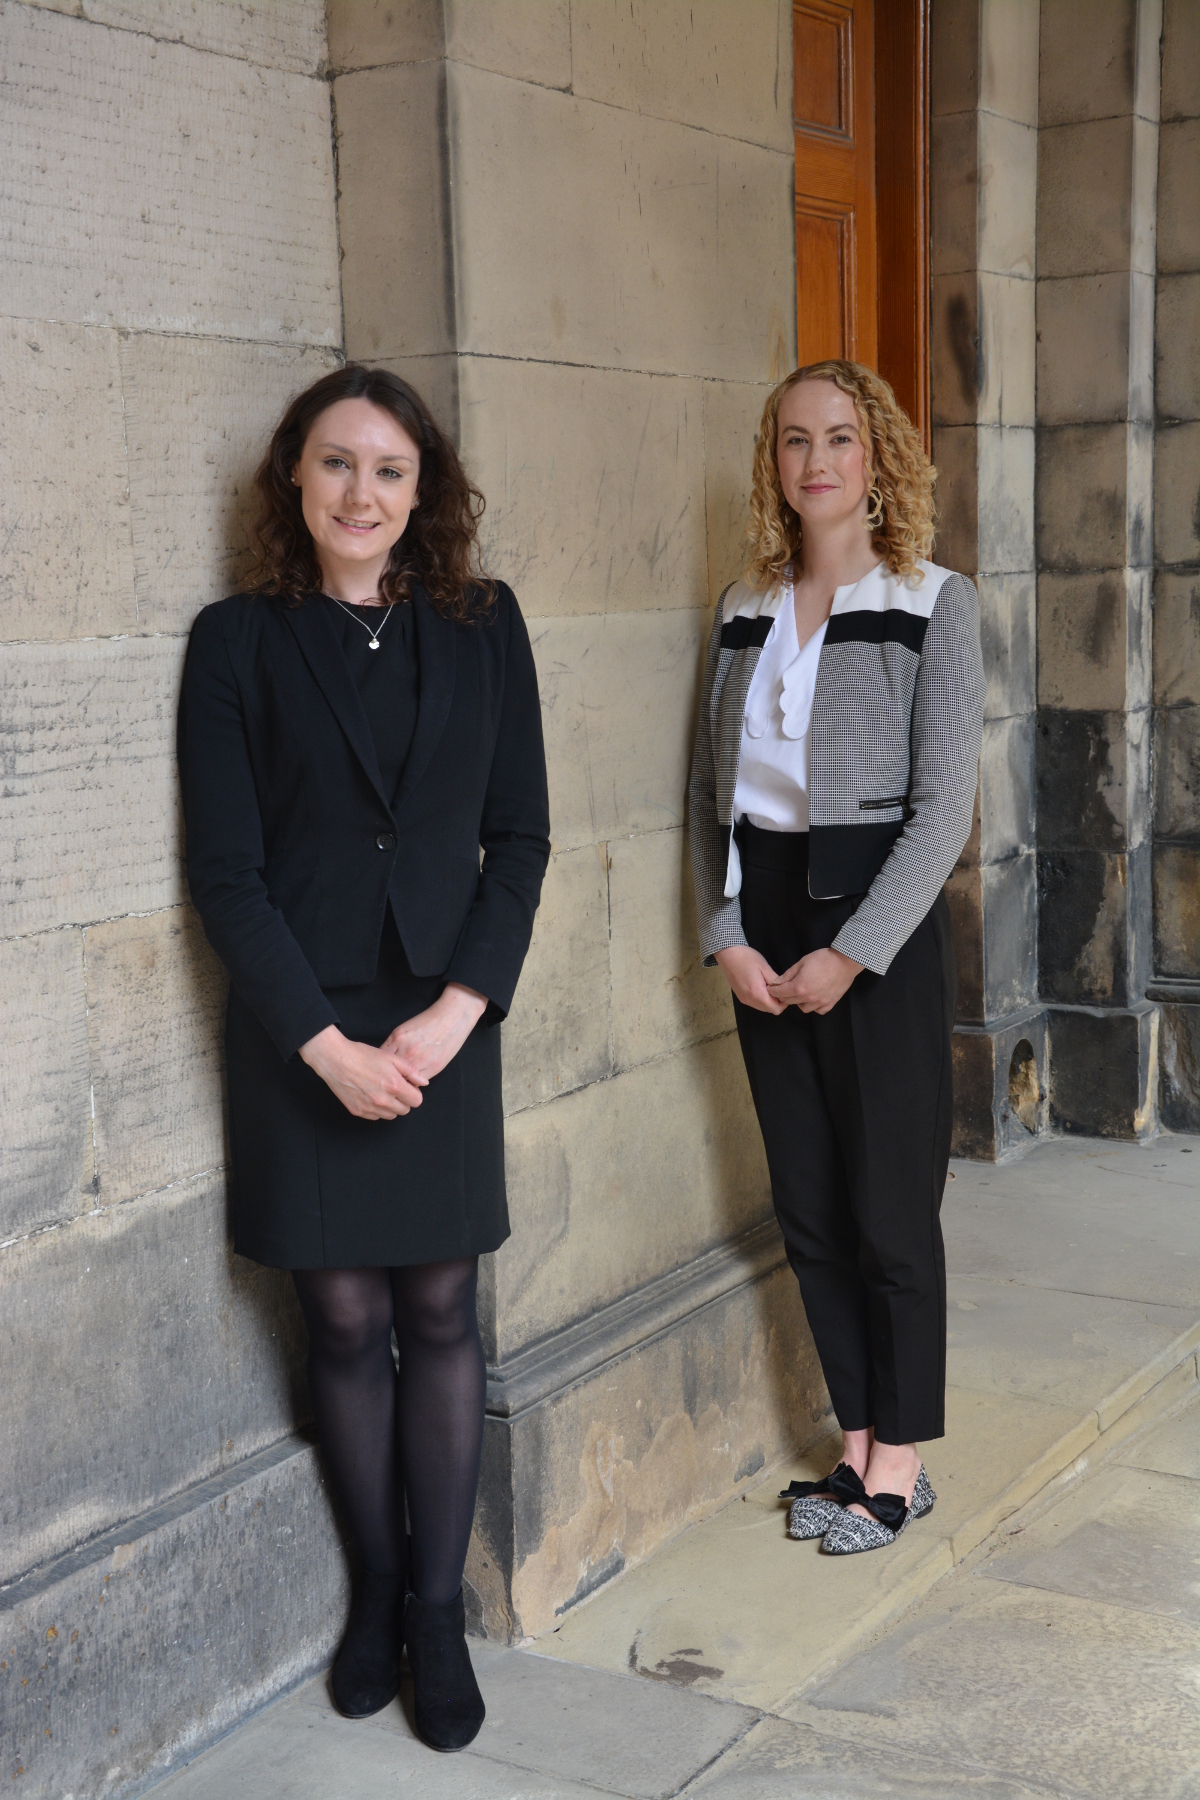 Sarah Trainer and Cat MacQueen join Arnot Manderson Advocates